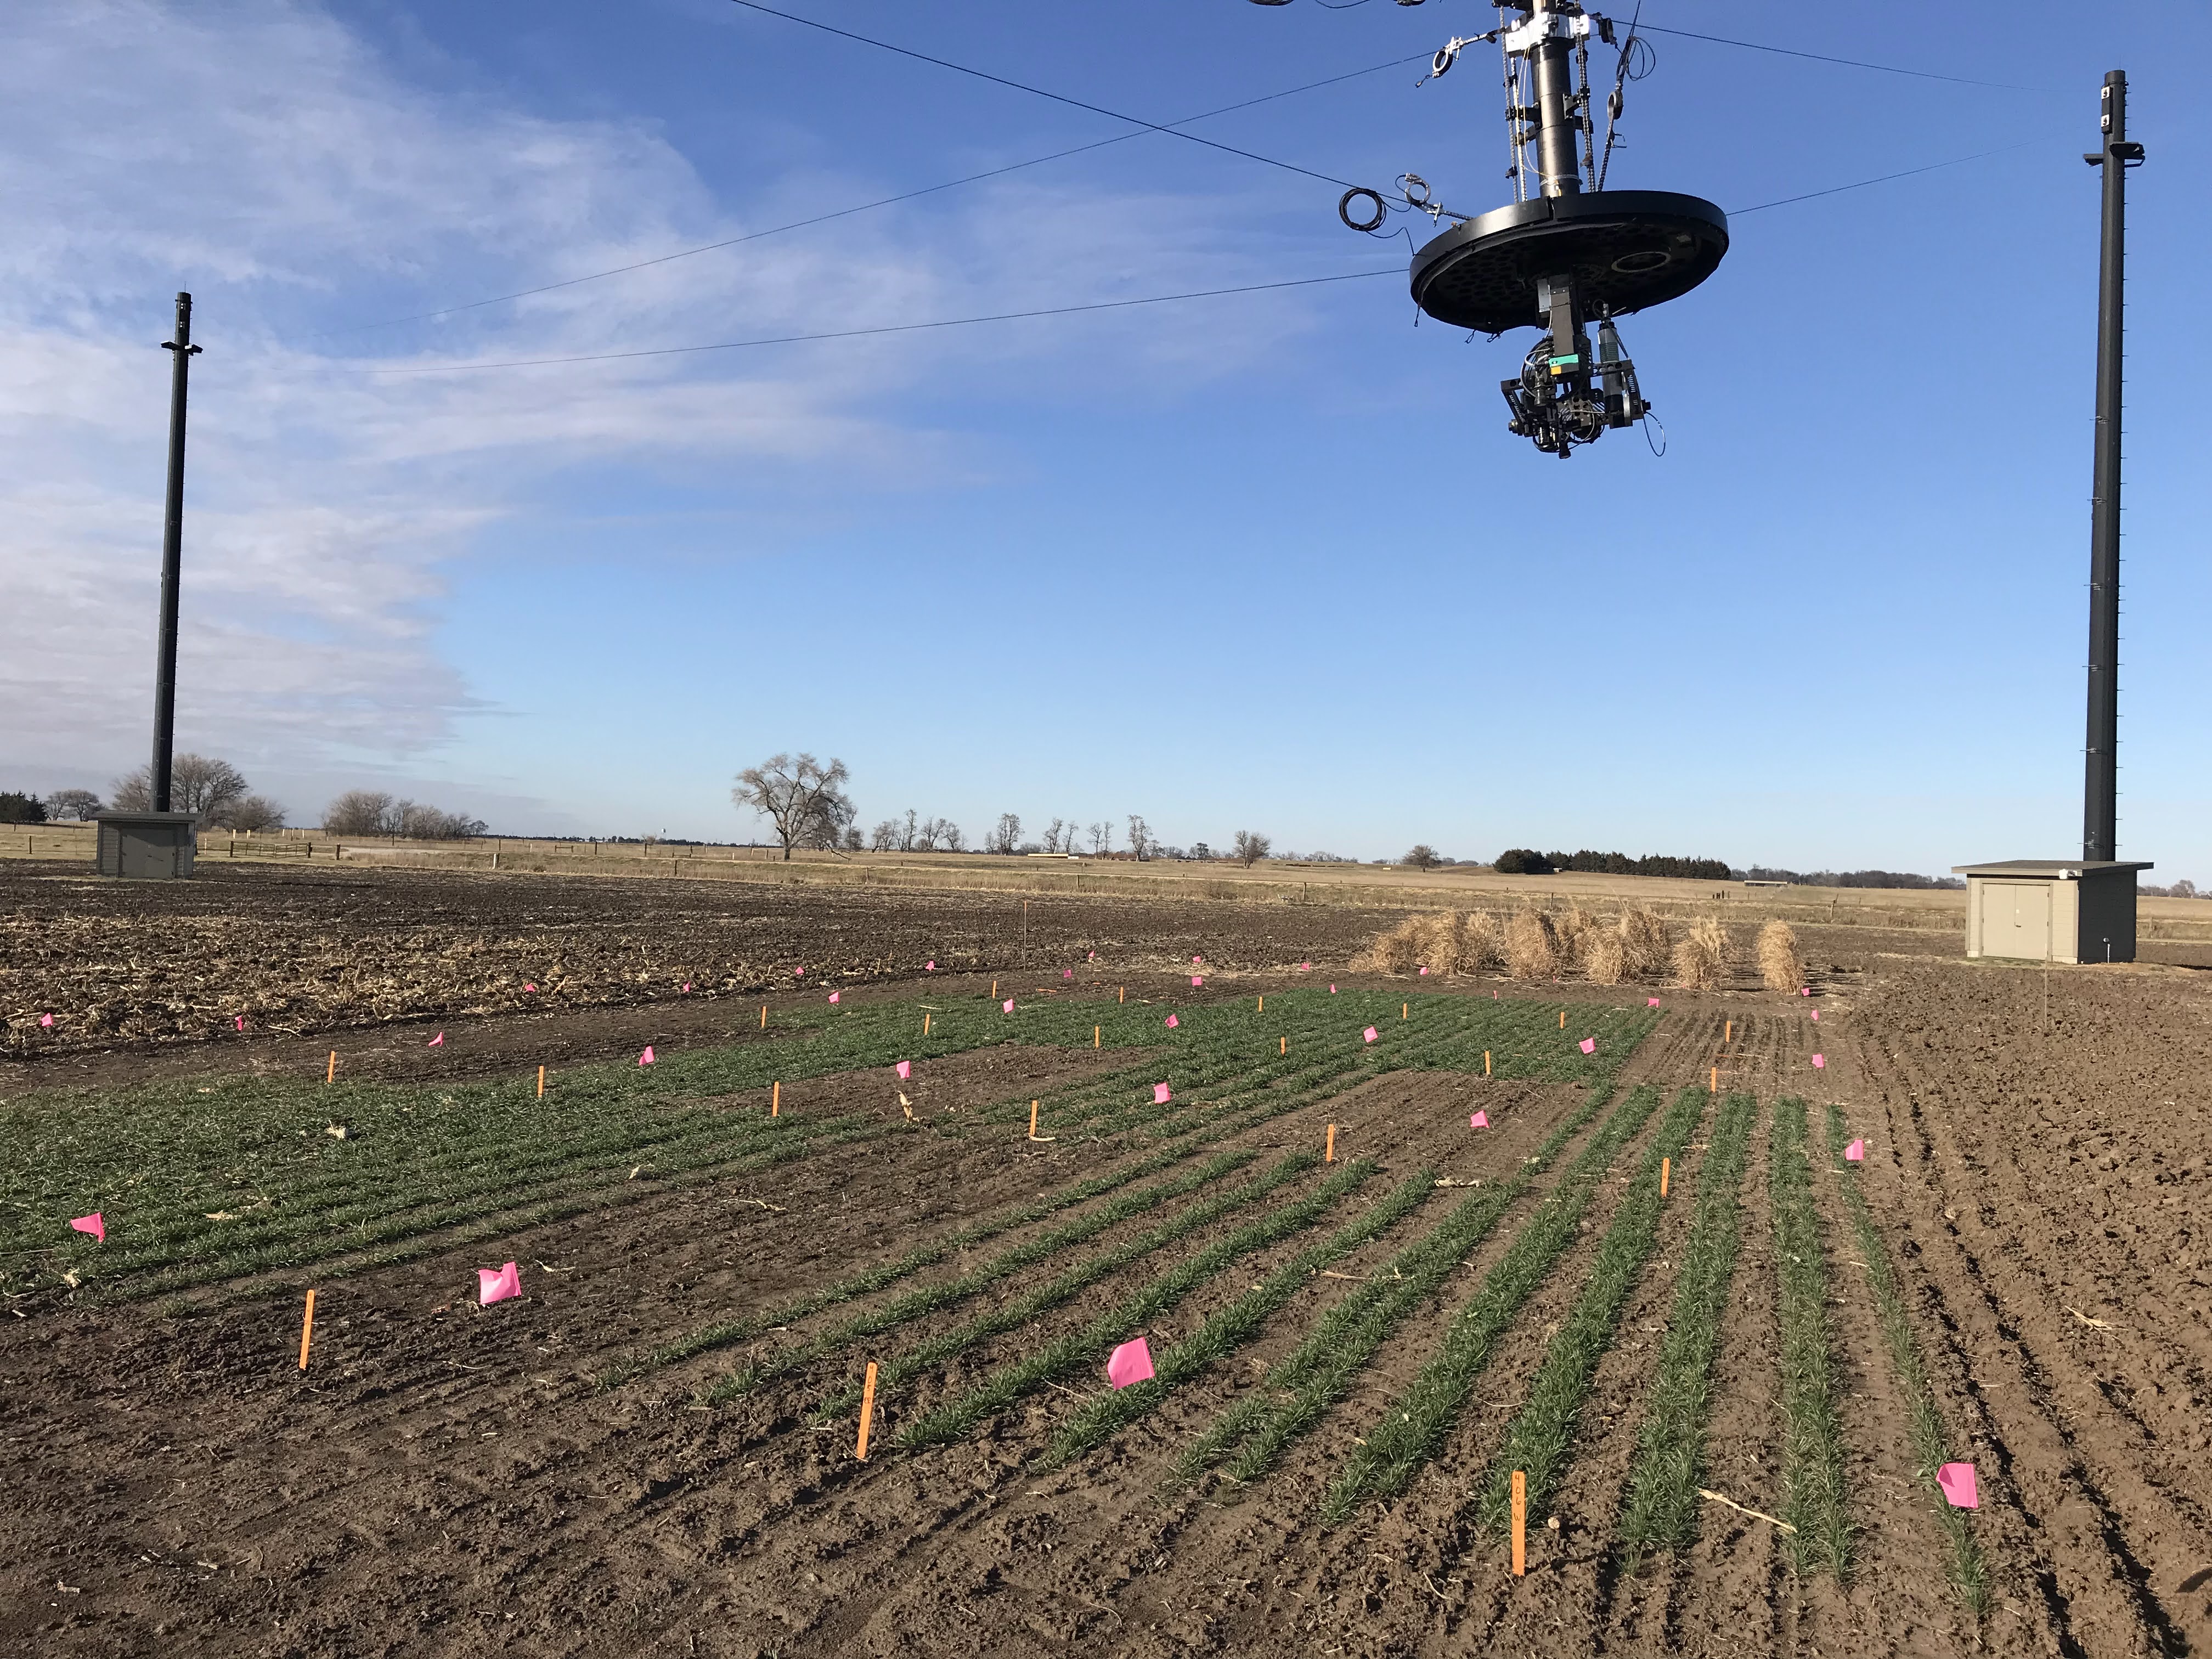 Crops grown at the ENREEC site near Mead for the cover crop research project include cereal rye, winter wheat, winter triticale, hairy vetch and canola. The site allows non-destructive data sampling through the Spidercam, which measures ground cover and crop height every other week.